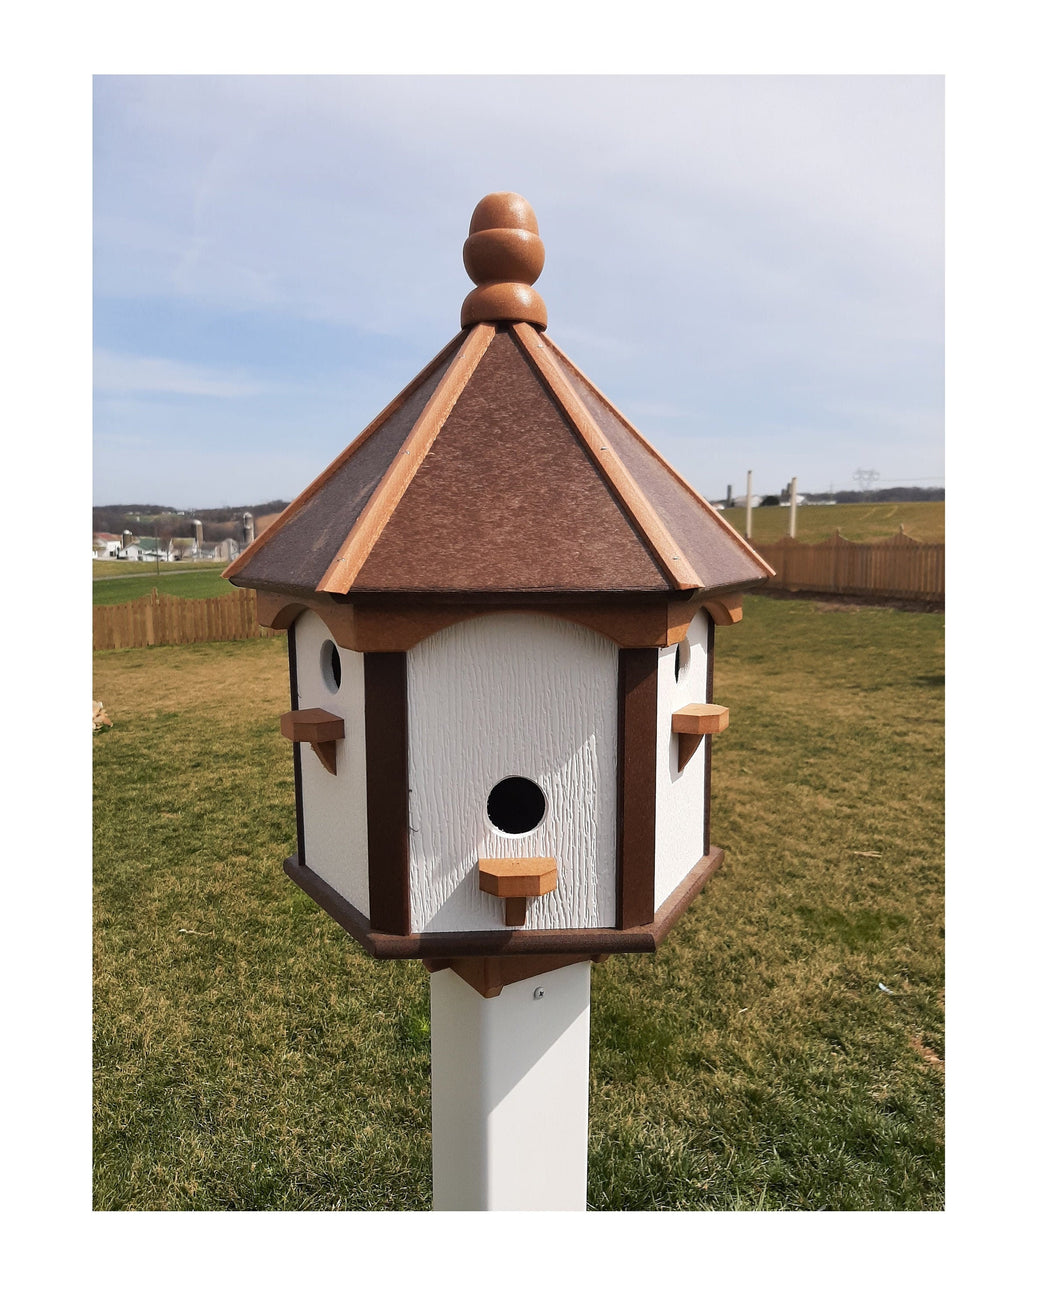 Birdhouse X-Large Amish Handmade, Poly Weather Resistant House With 6 Nesting Compartments